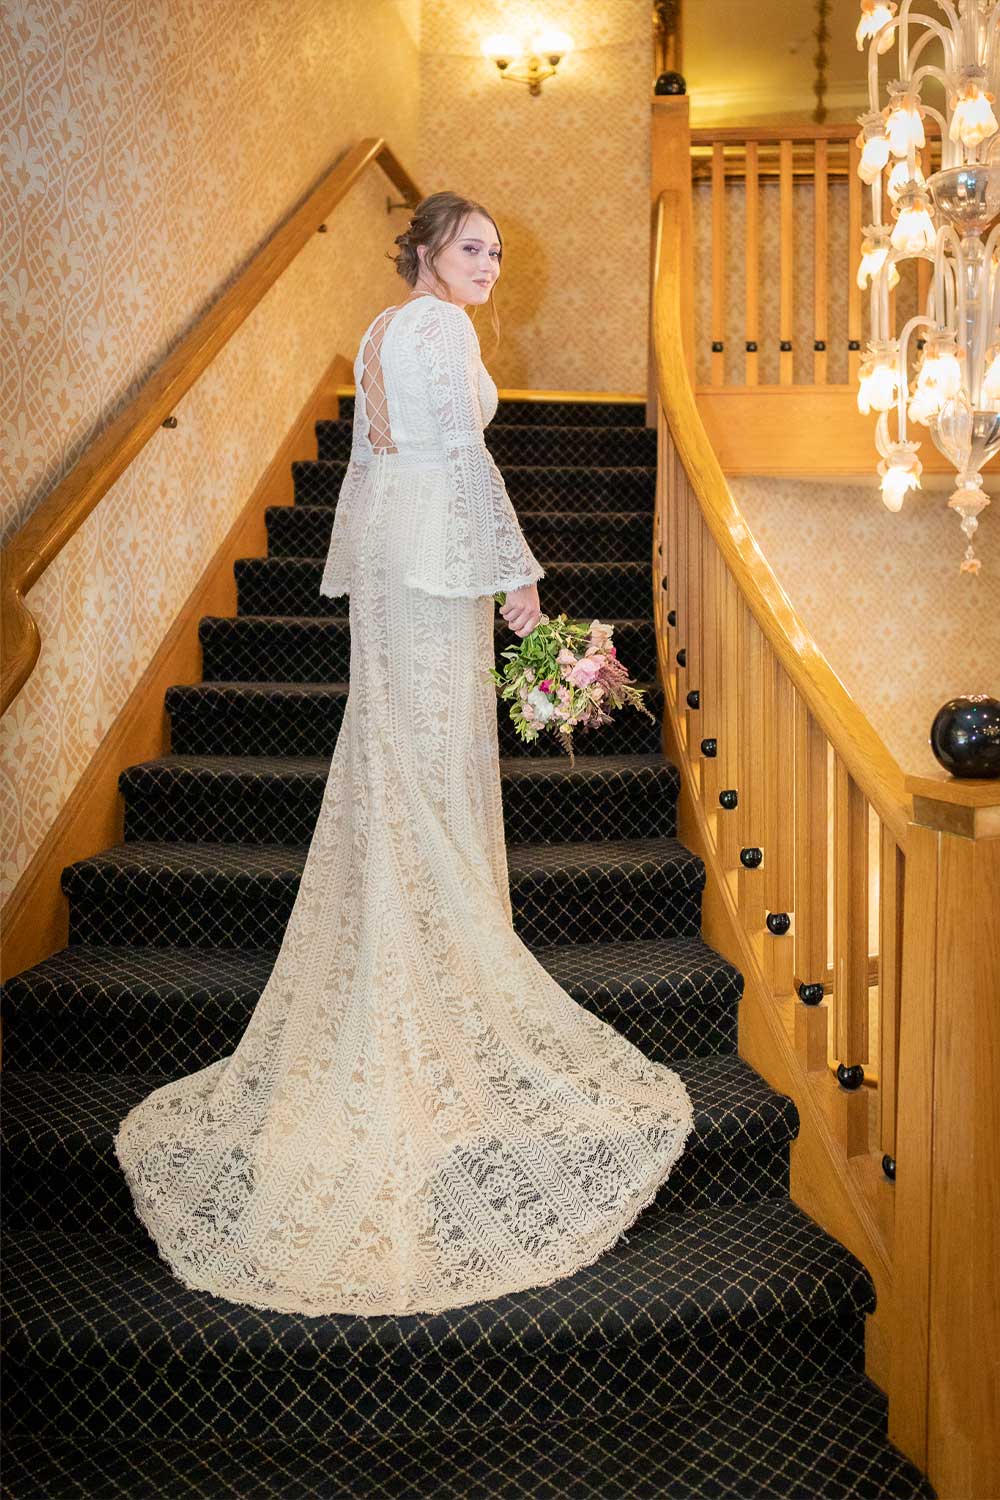 Bride on stairs at the Grand Hotel, Torquay